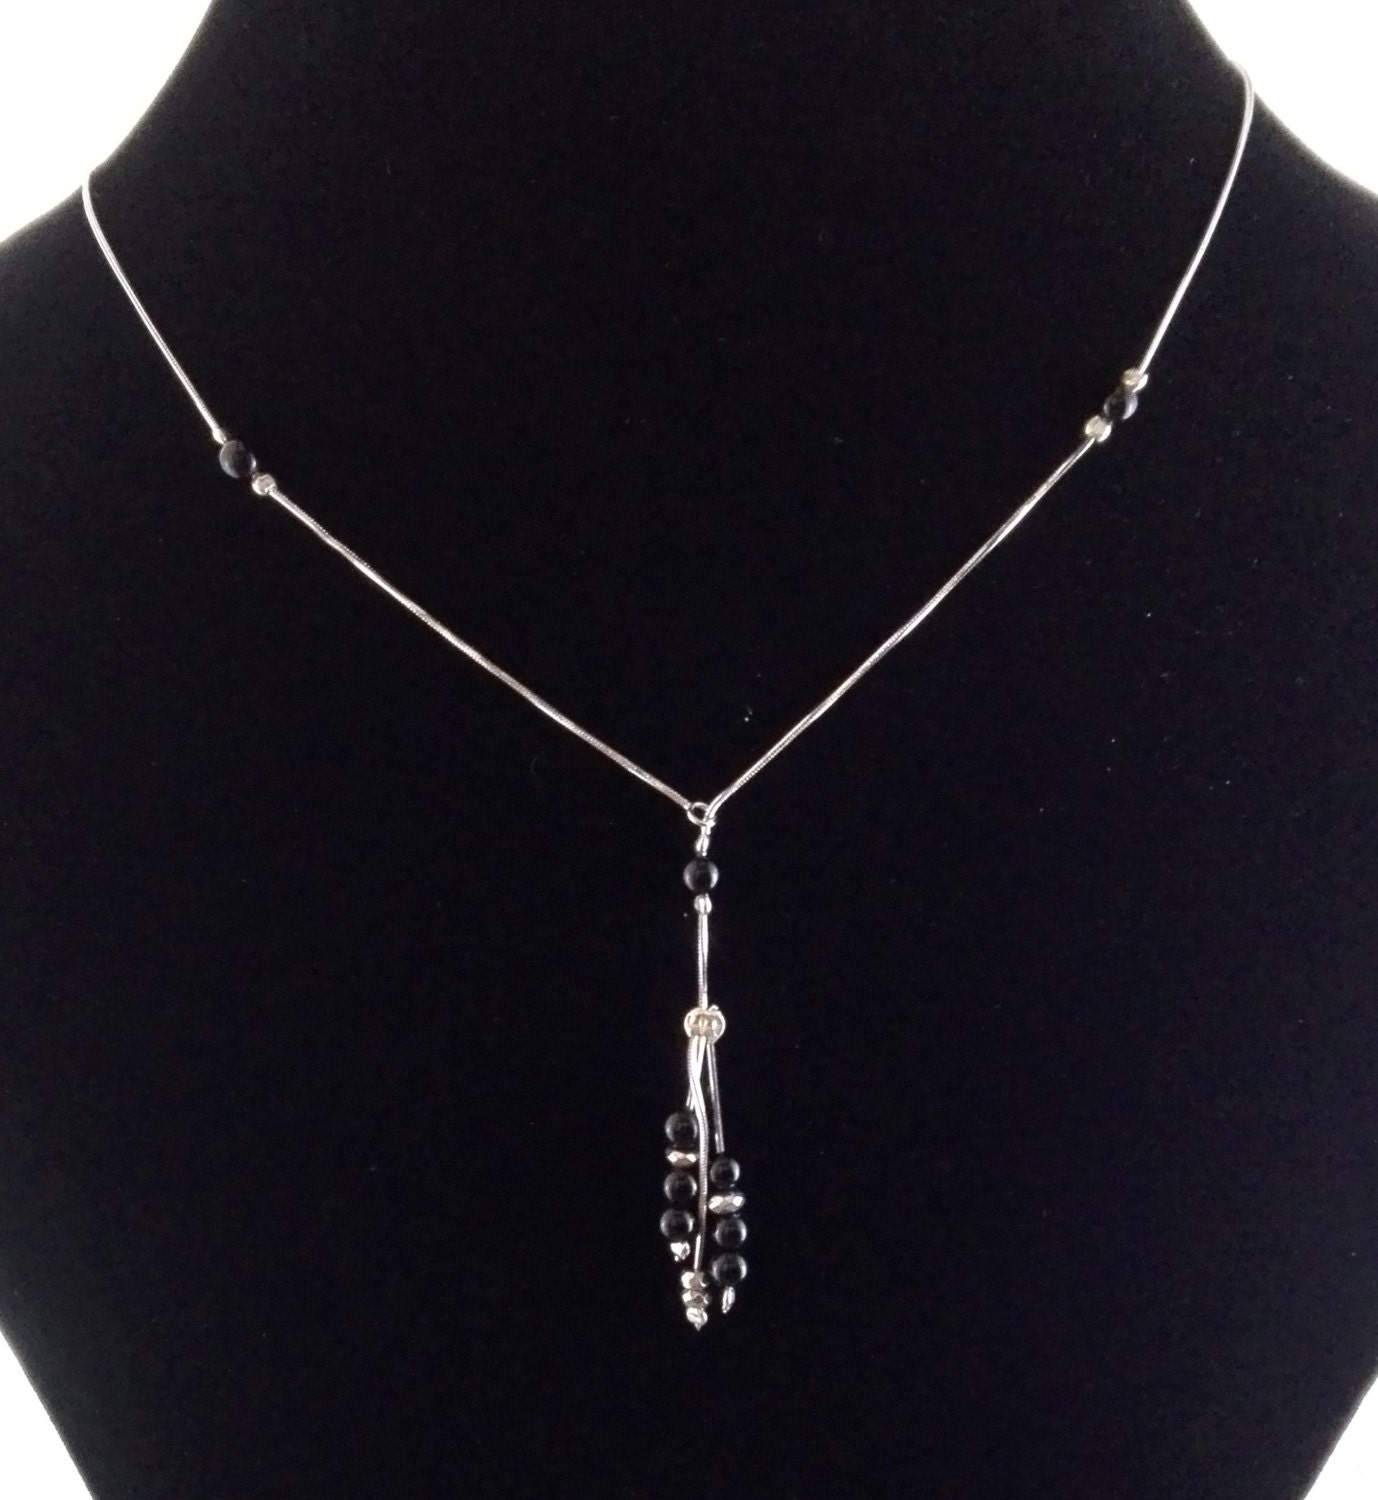 Silver necklace with two positions